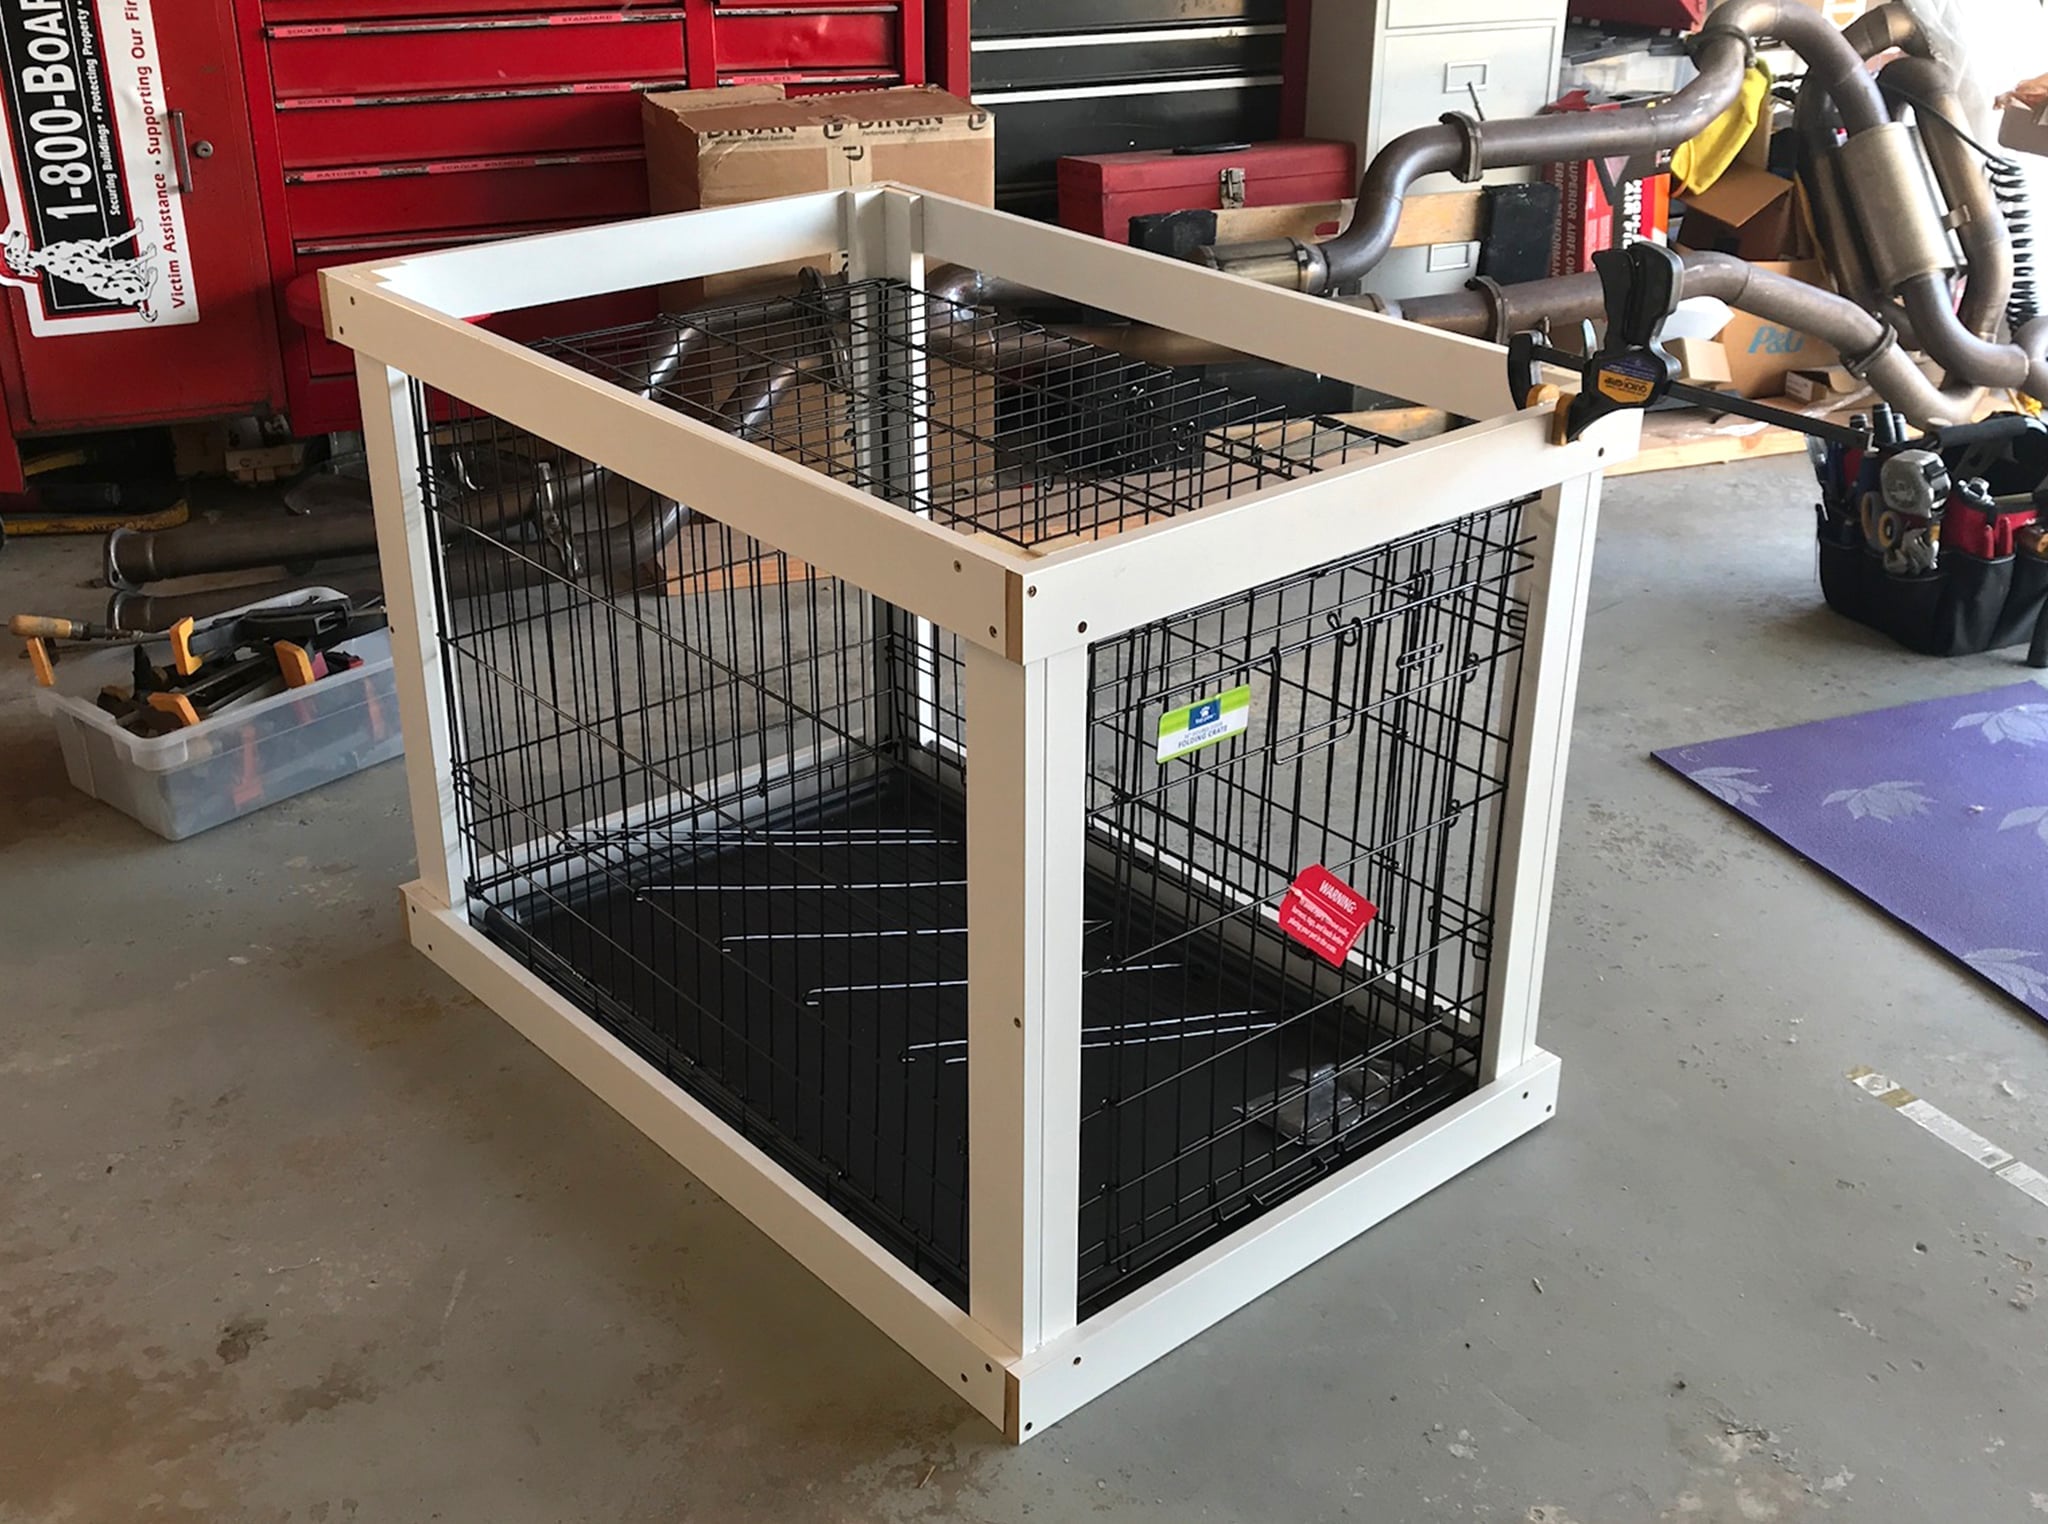 2 room dog crate